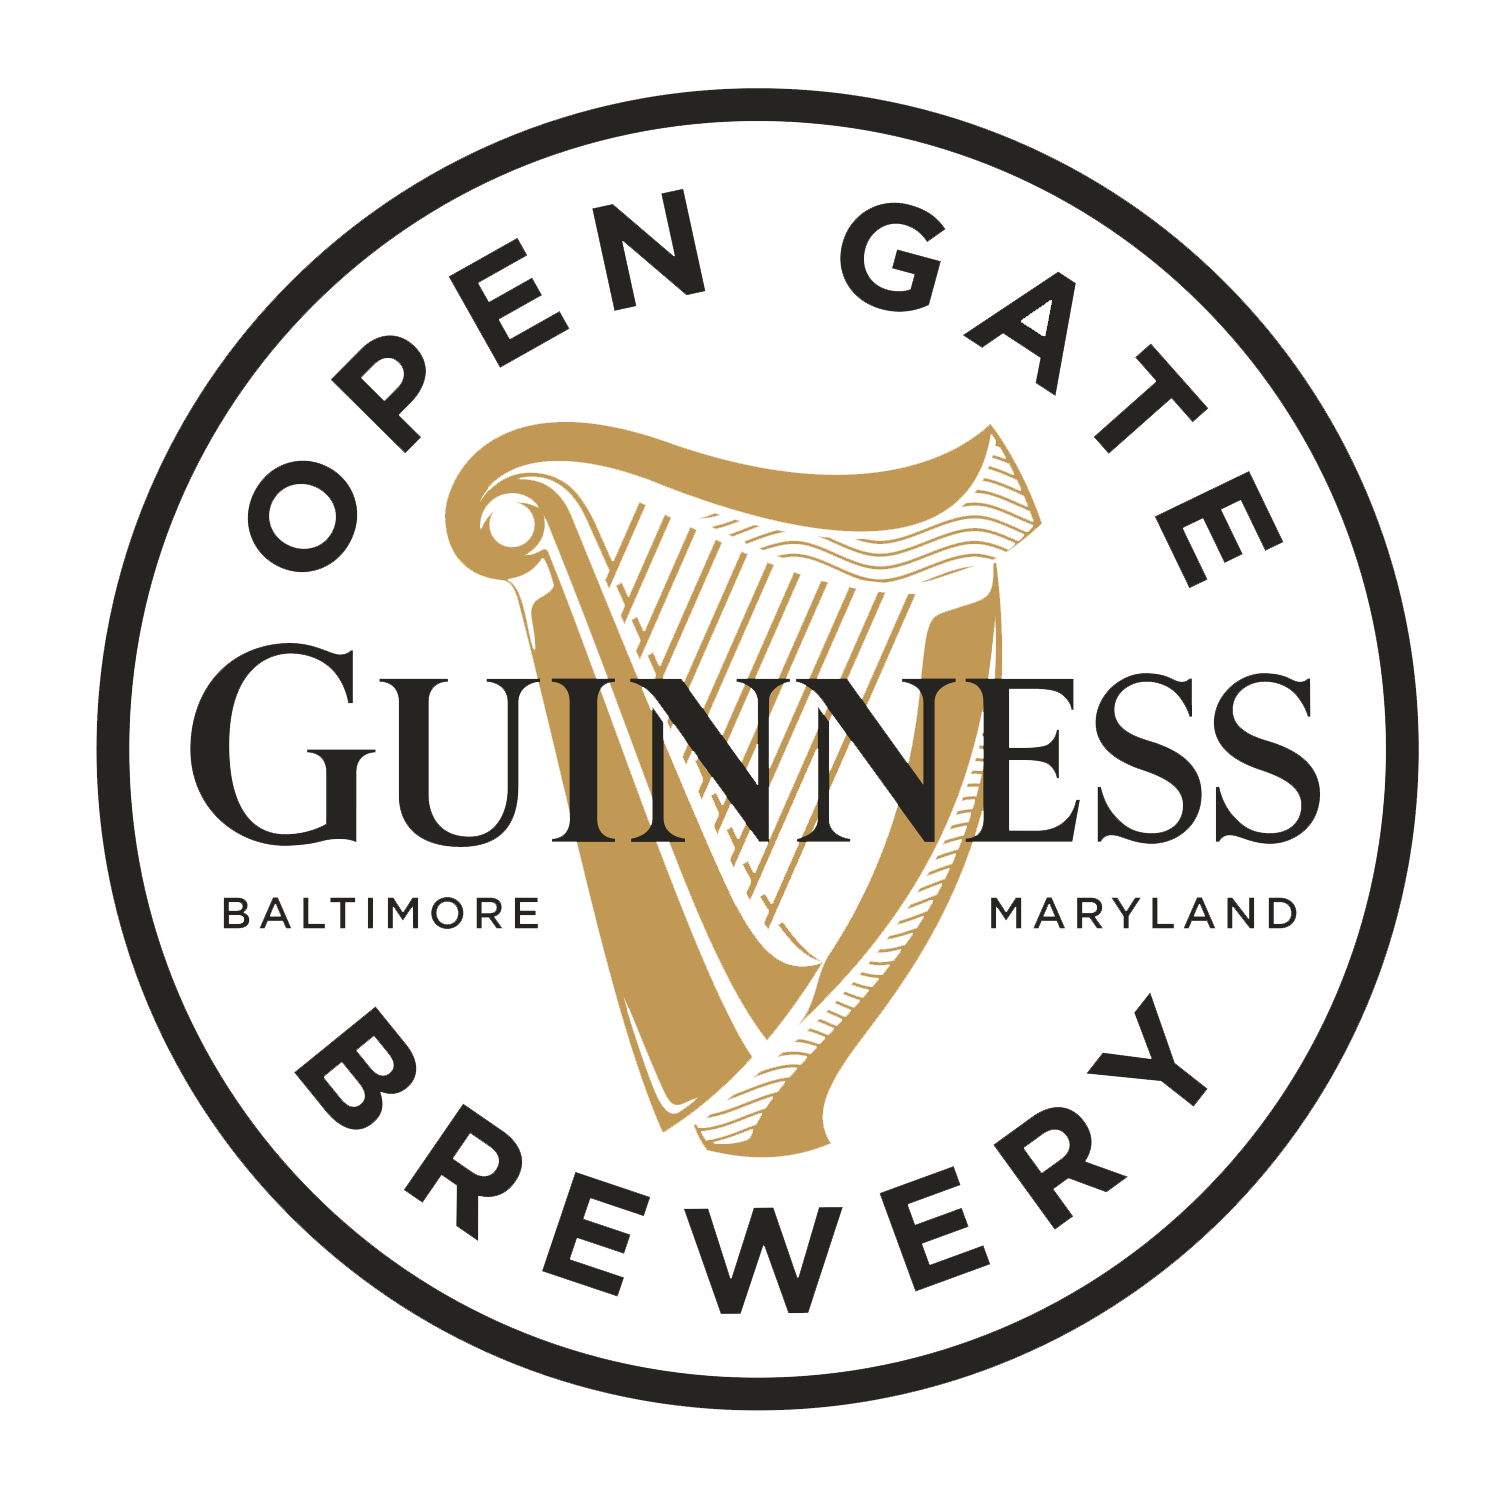 The Session | Guinness Open Gate Brewery